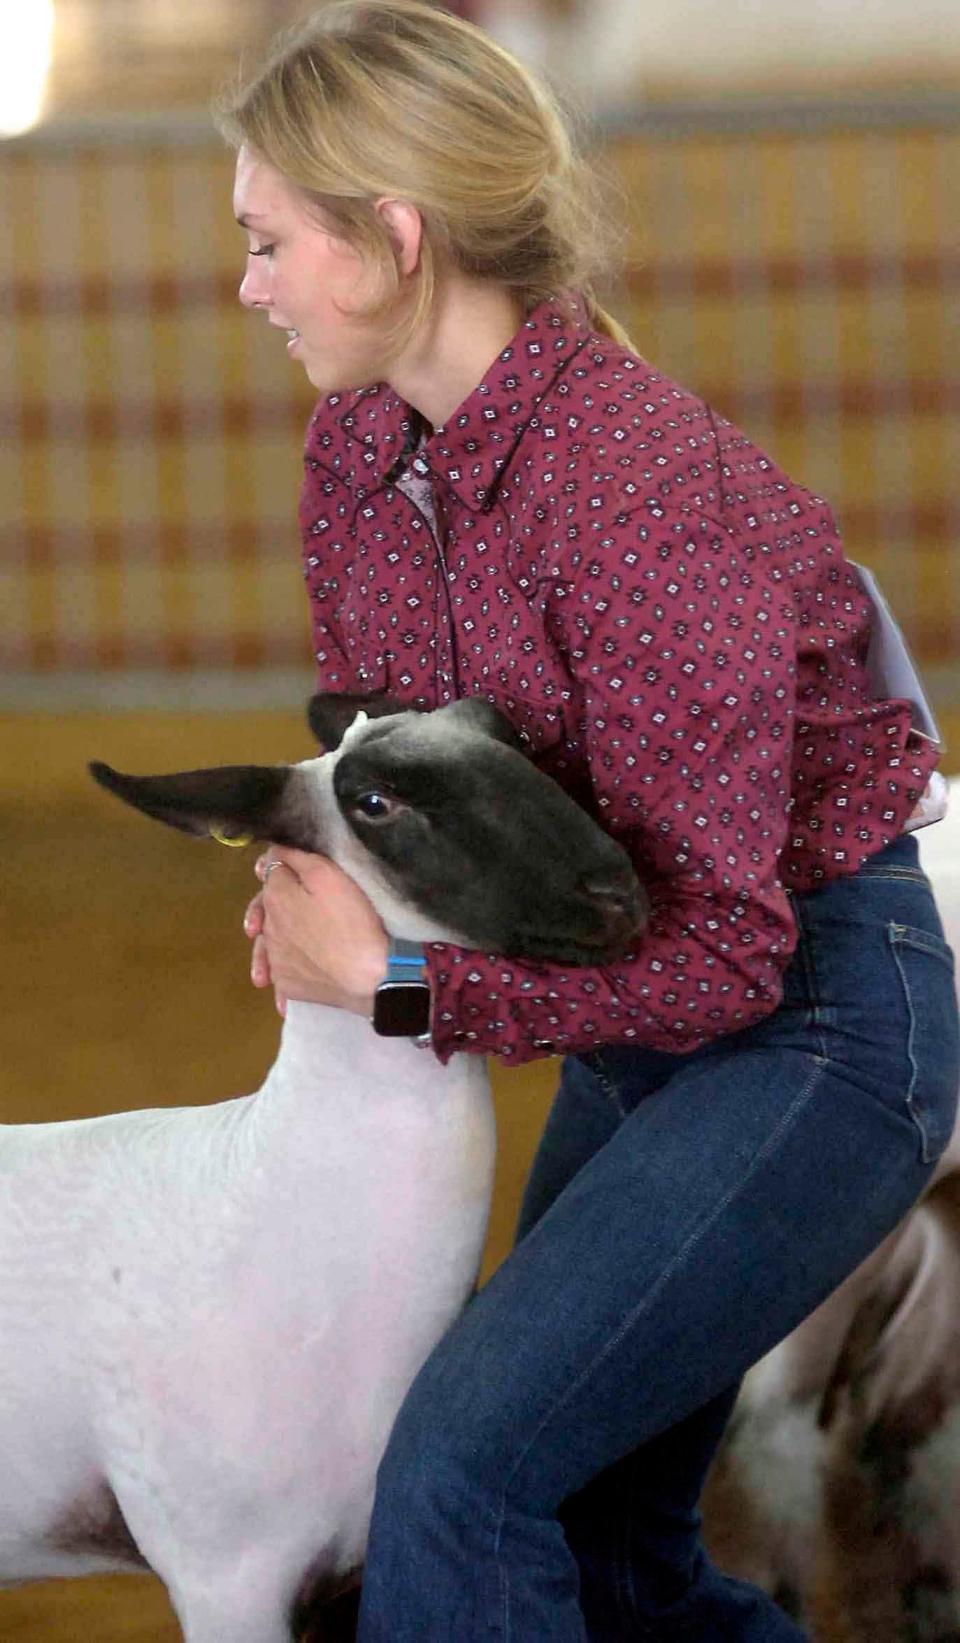 Timber Banks wrestles with her market lamb during judging at the Ashland County Fair on Monday.